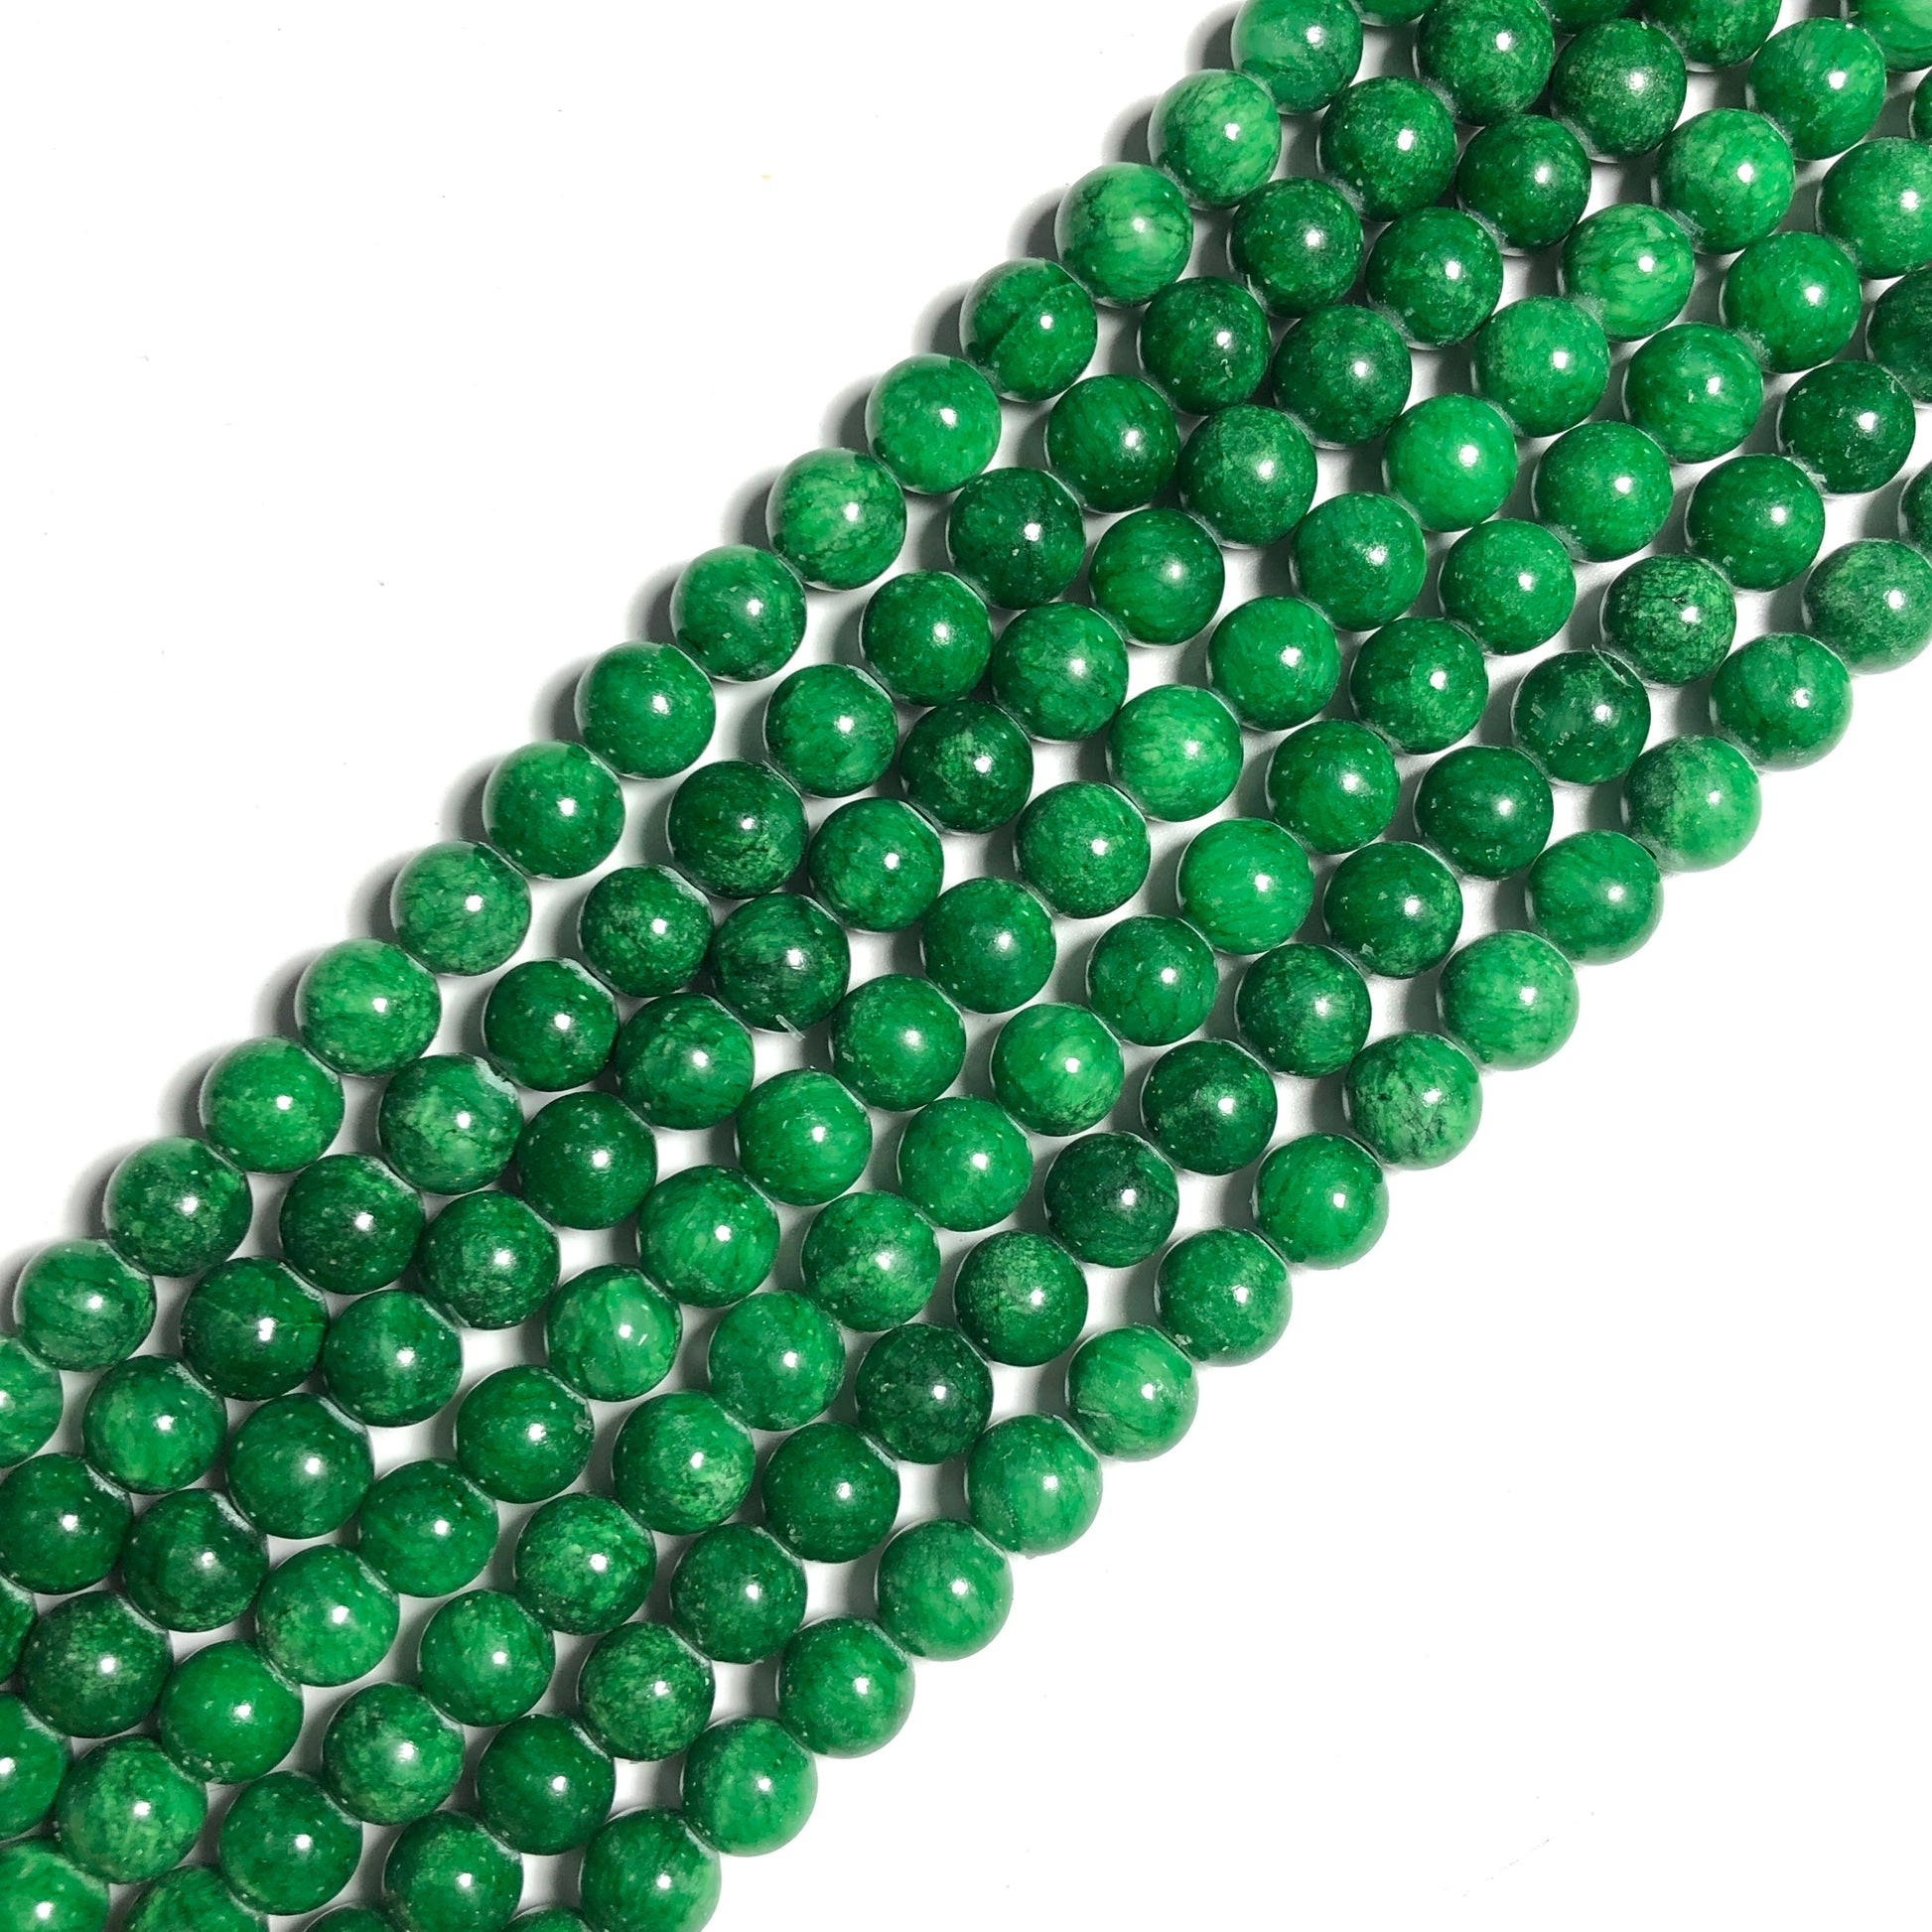 2 Strands/lot 10mm Mardi Gras Color Yellow Green Purple Jade Round Stone Beads 2 Strands Green Stone Beads Mardi Gras New Beads Arrivals Round Jade Beads Charms Beads Beyond